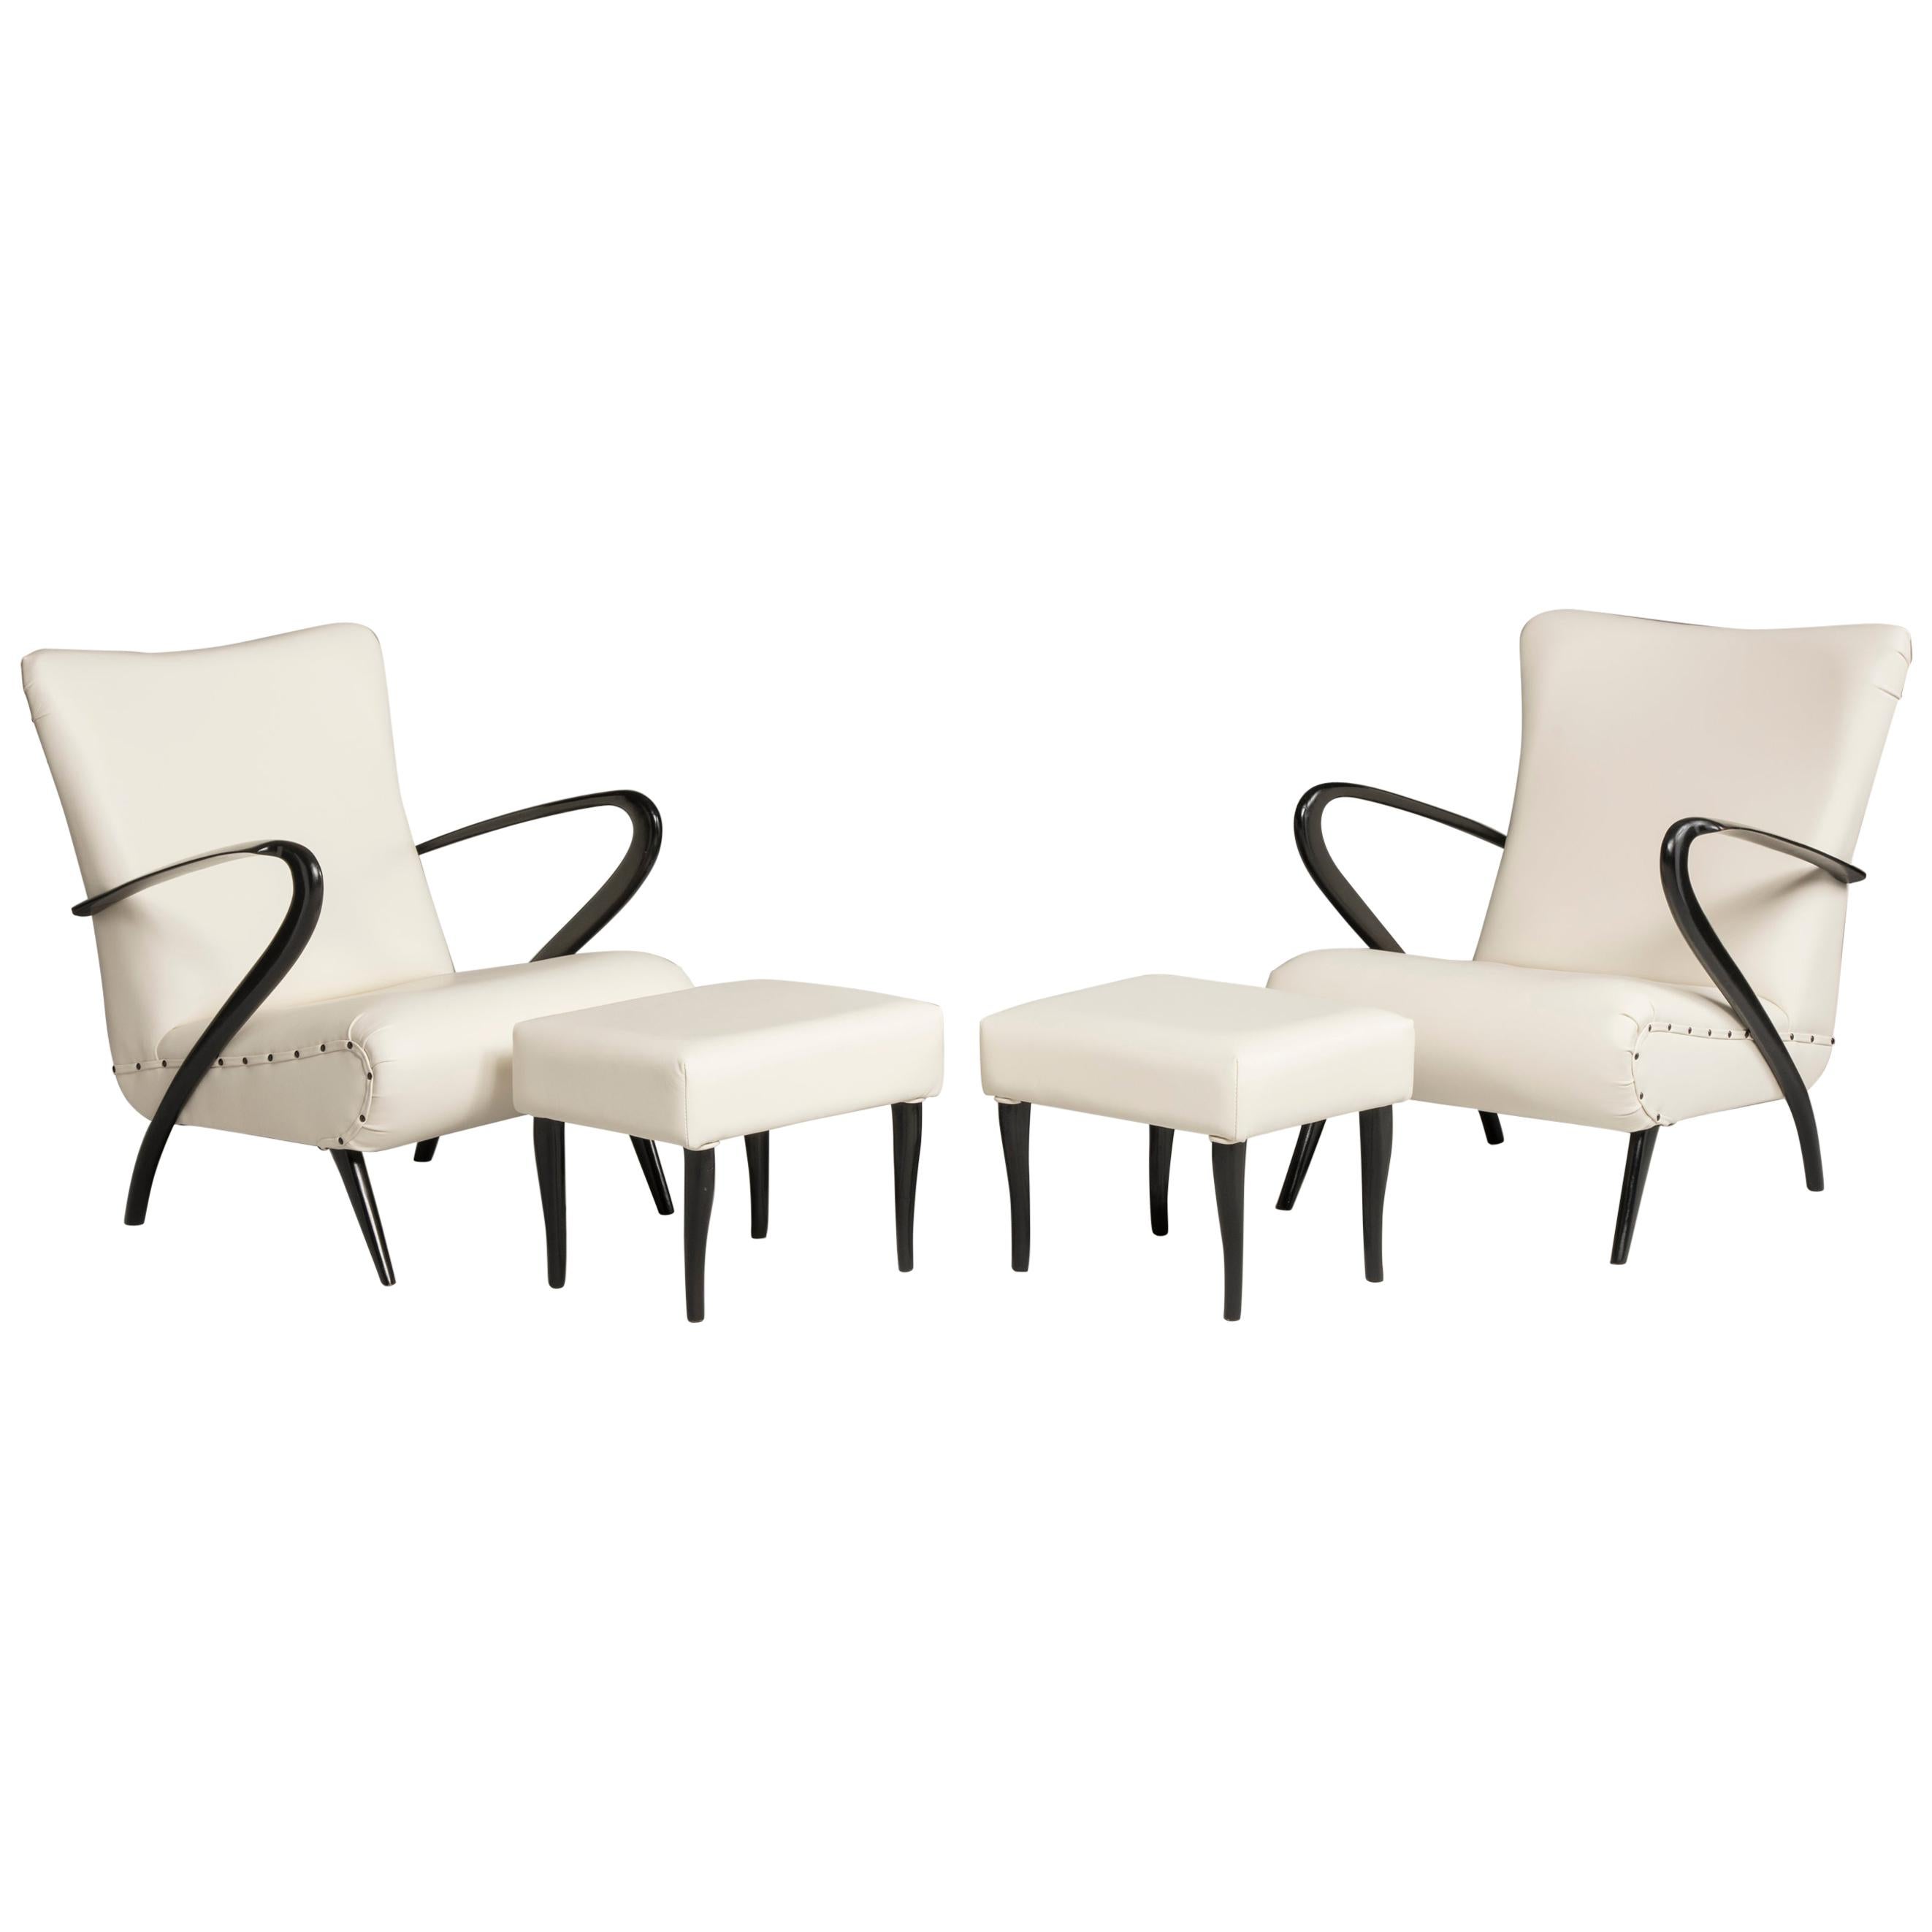 Midcentury White Leather Black Wood Armchairs with Pouffs